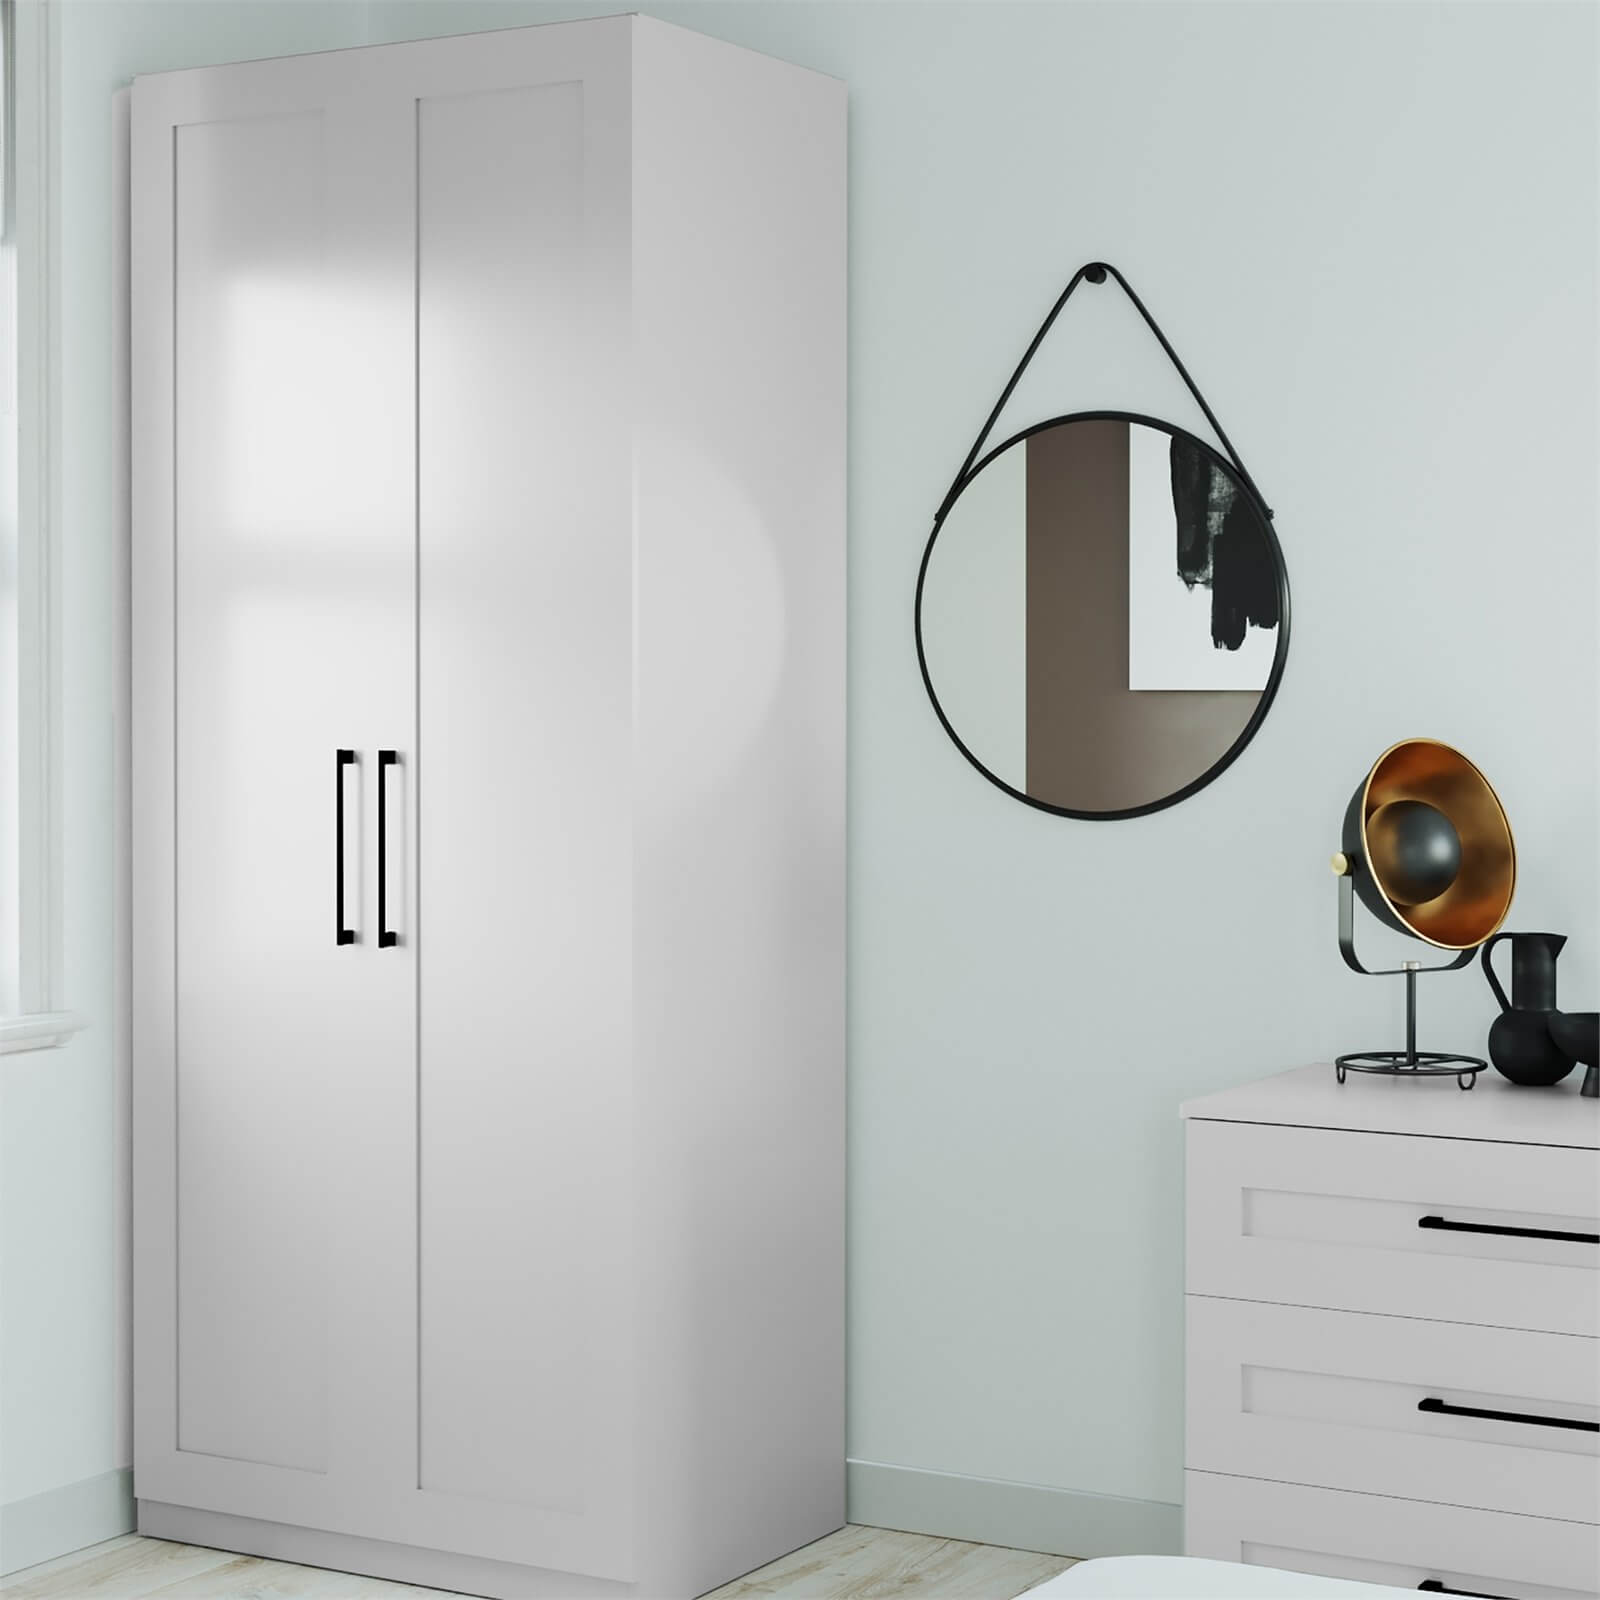 Photo of Fitted Bedroom Shaker Double Wardrobe - Grey